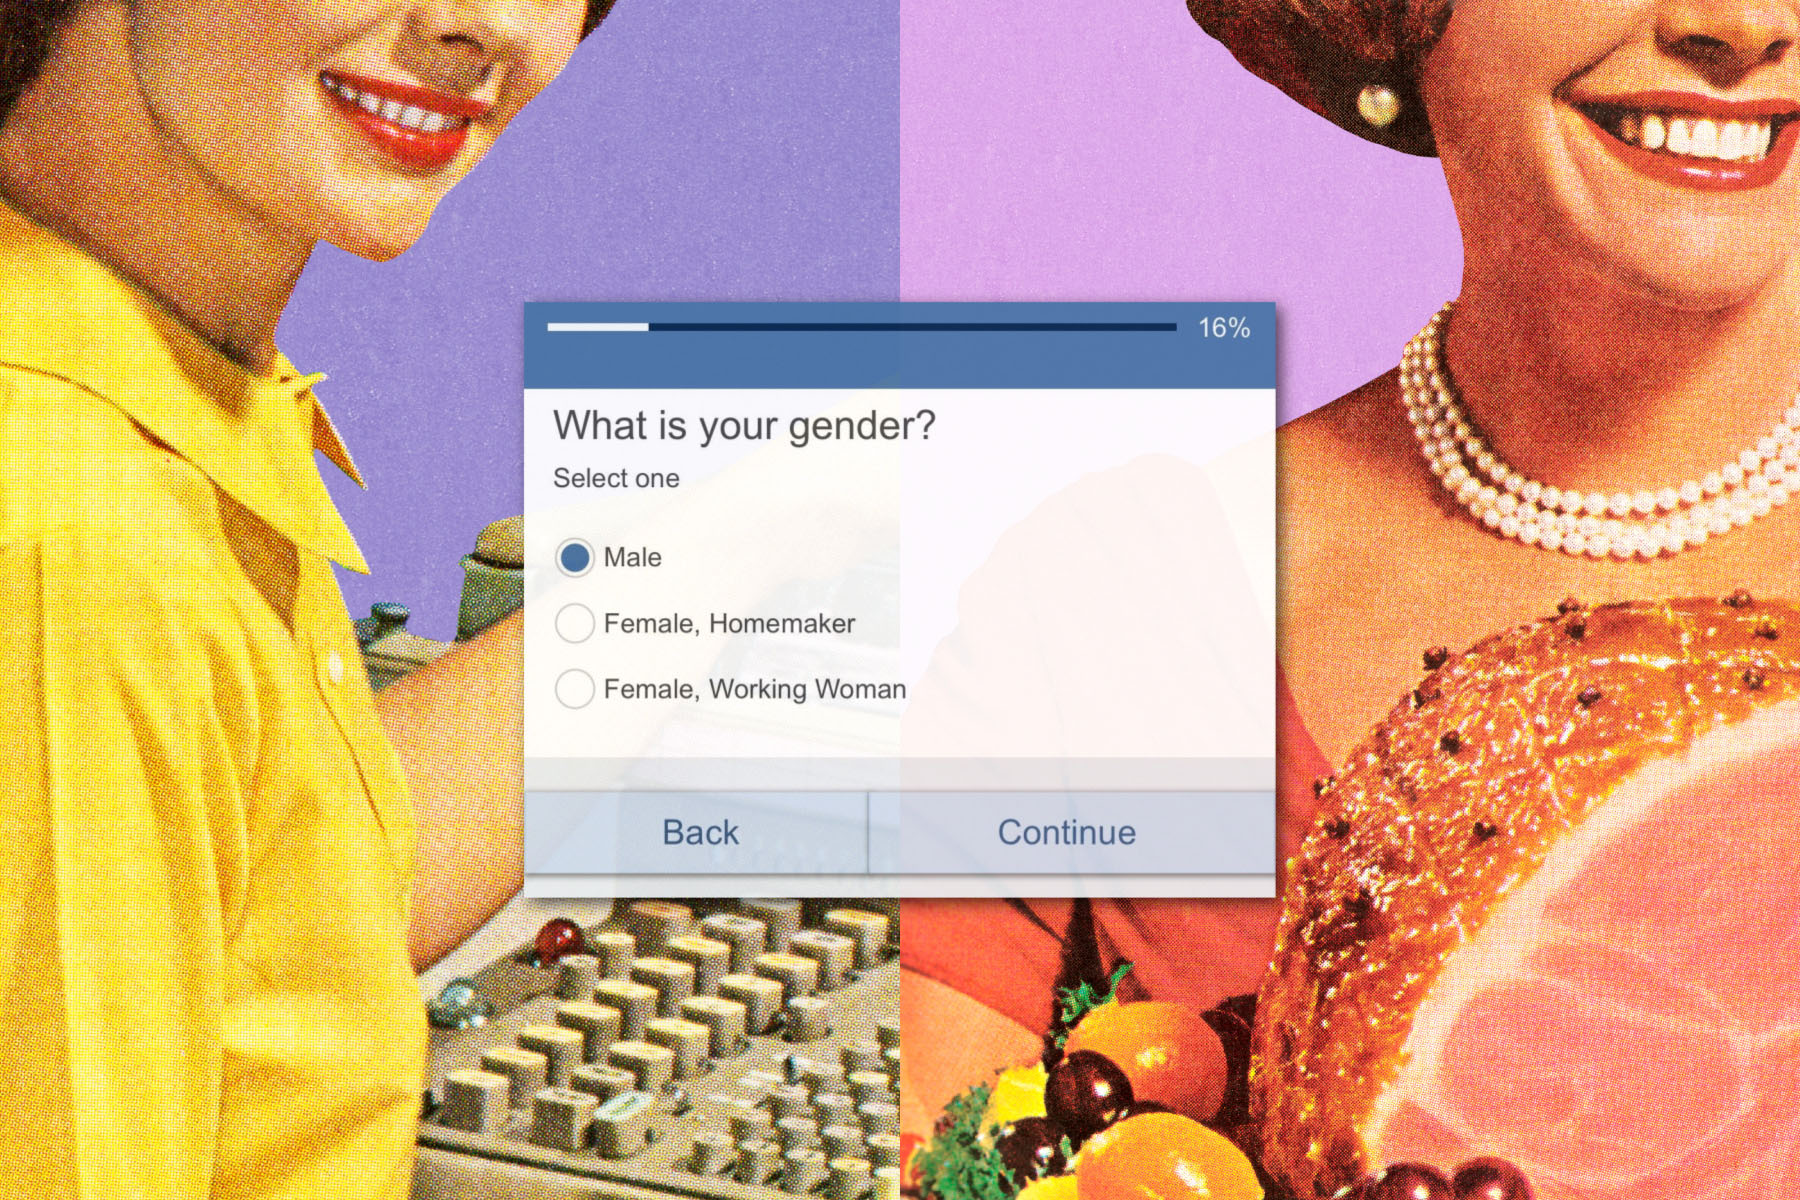 1960s style illustrations show a woman smiling with a ham in hand and a woman typing on an antiquated computer are overlayed with a screenshot from the survey that reads "What is your gender? Select one: Male, Female/ Homemaker, Female/Working Woman."